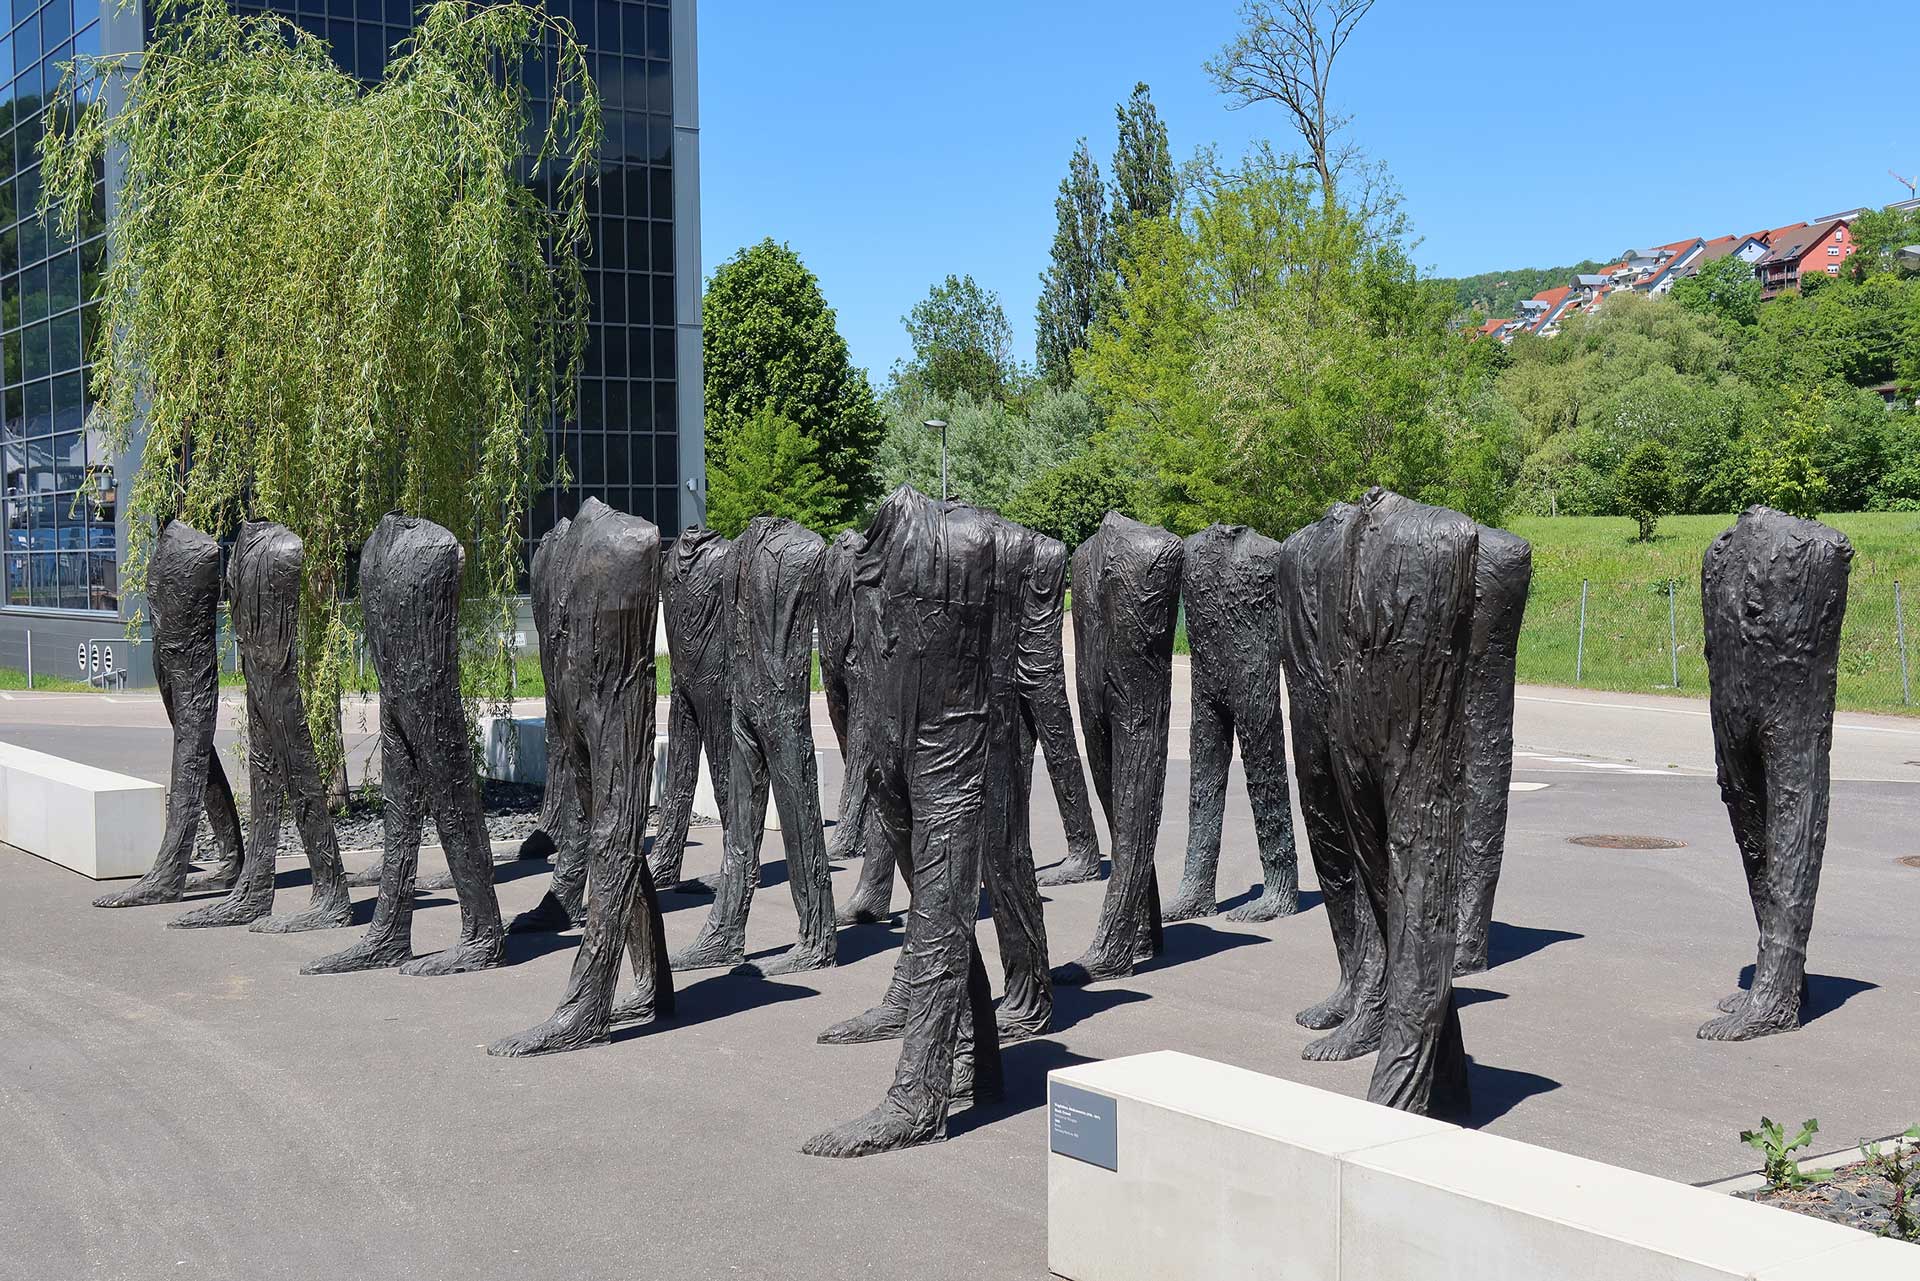 WÜRTH COLLECTION ON THE ROAD  Satellites of the Würth Collection can be found in Salzburg, Berlin, Marbach am Neckar, and Künzelsau. Magdalena Abakanowicz’s Black Crowd group of sculptures, the most recent loan in Künzelsau, now populates the Reinhold-Würth-Hochschule campus.